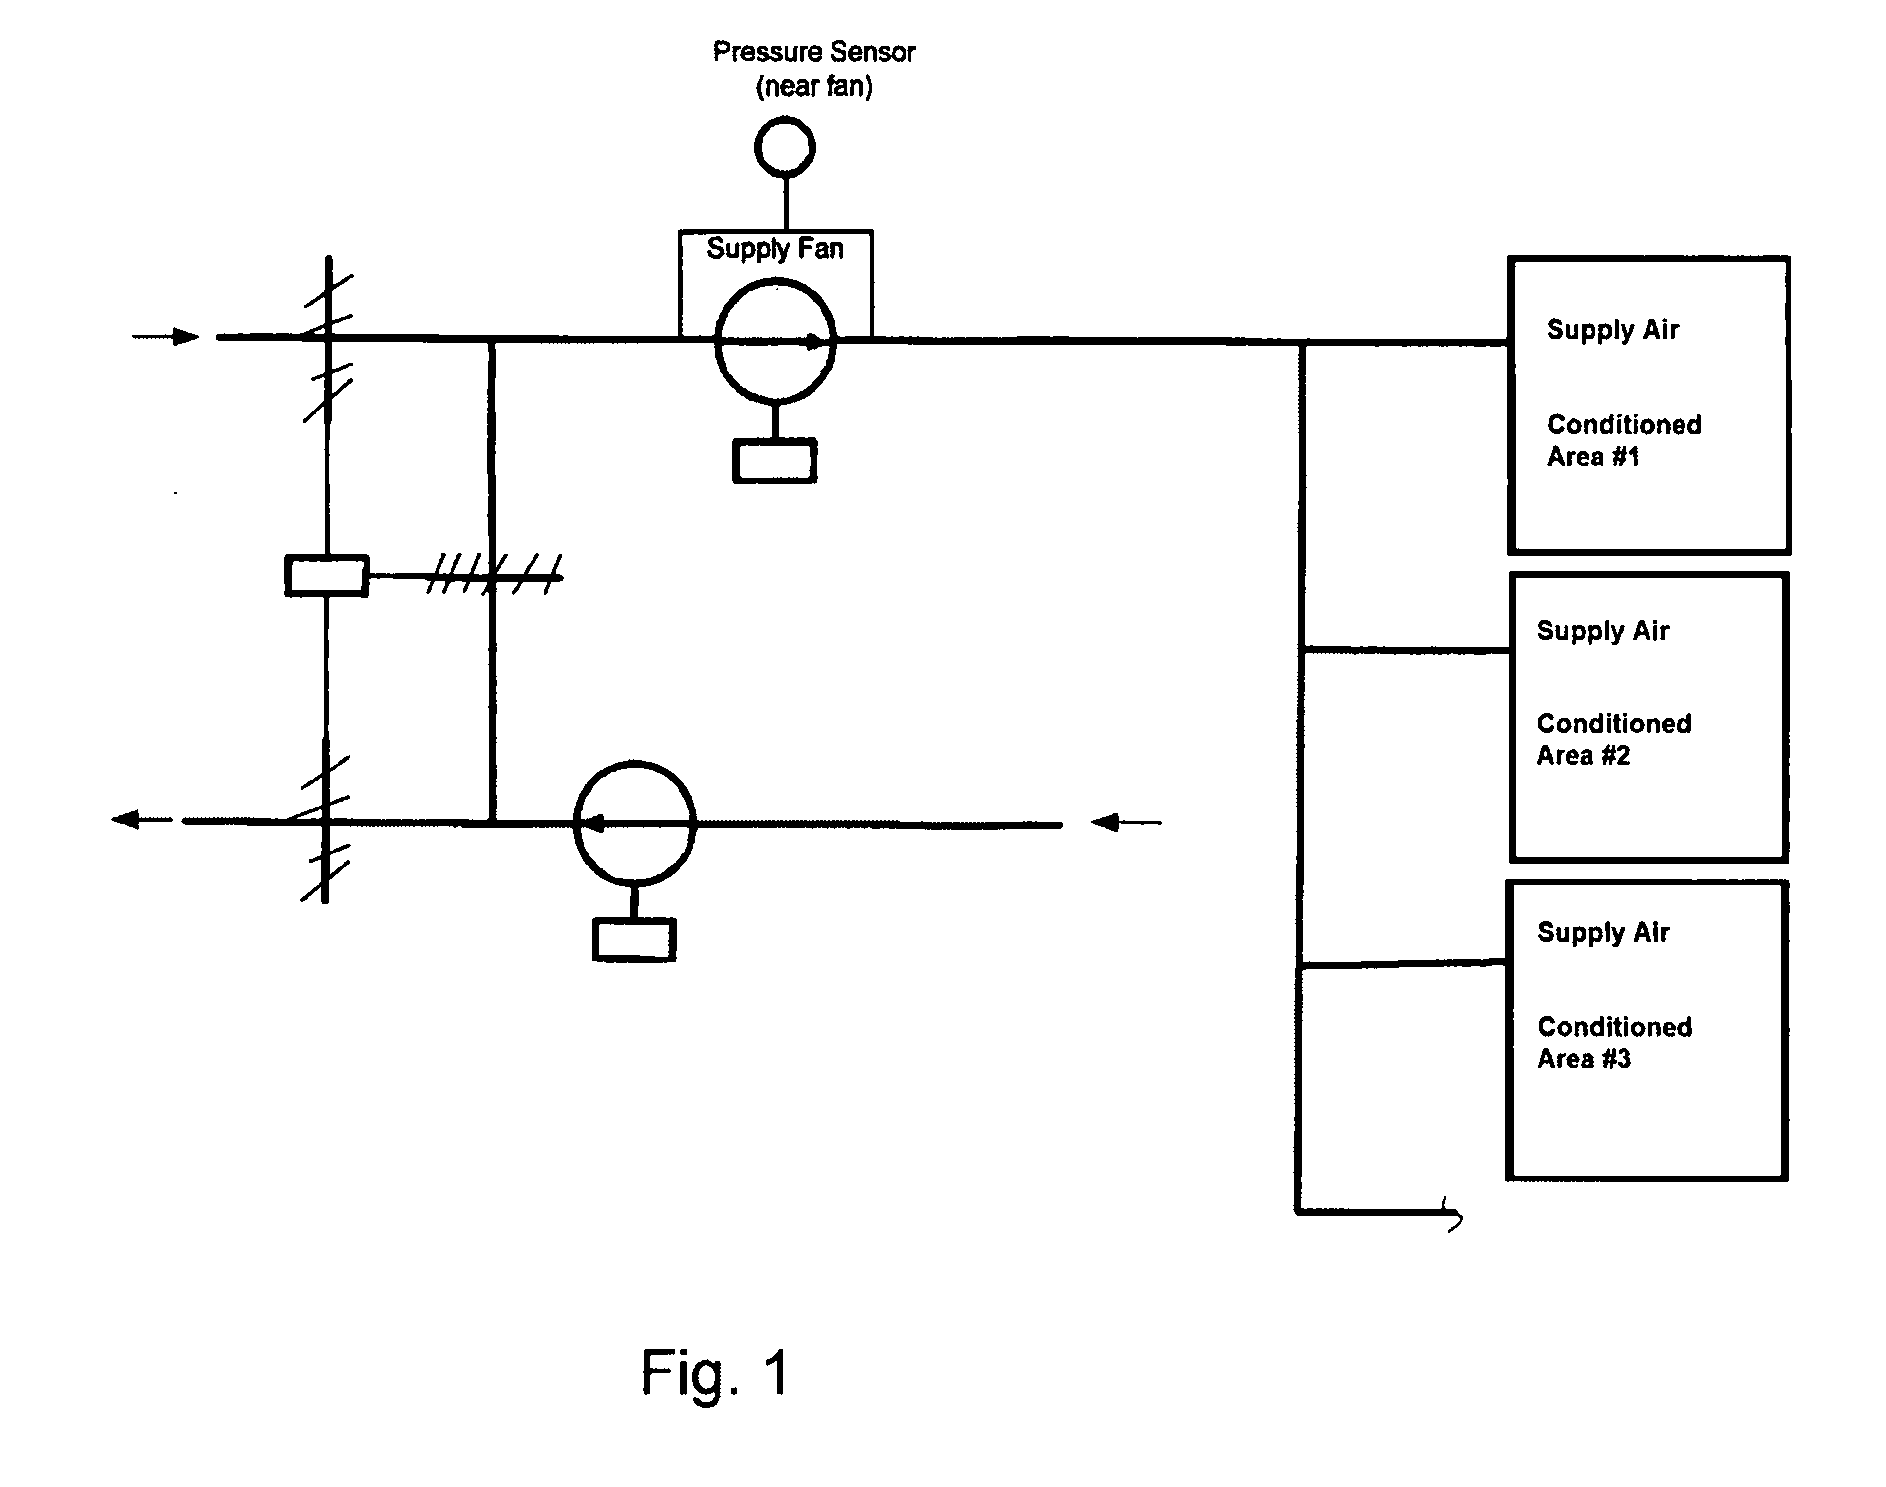 Method for improving efficiency in heating and cooling systems